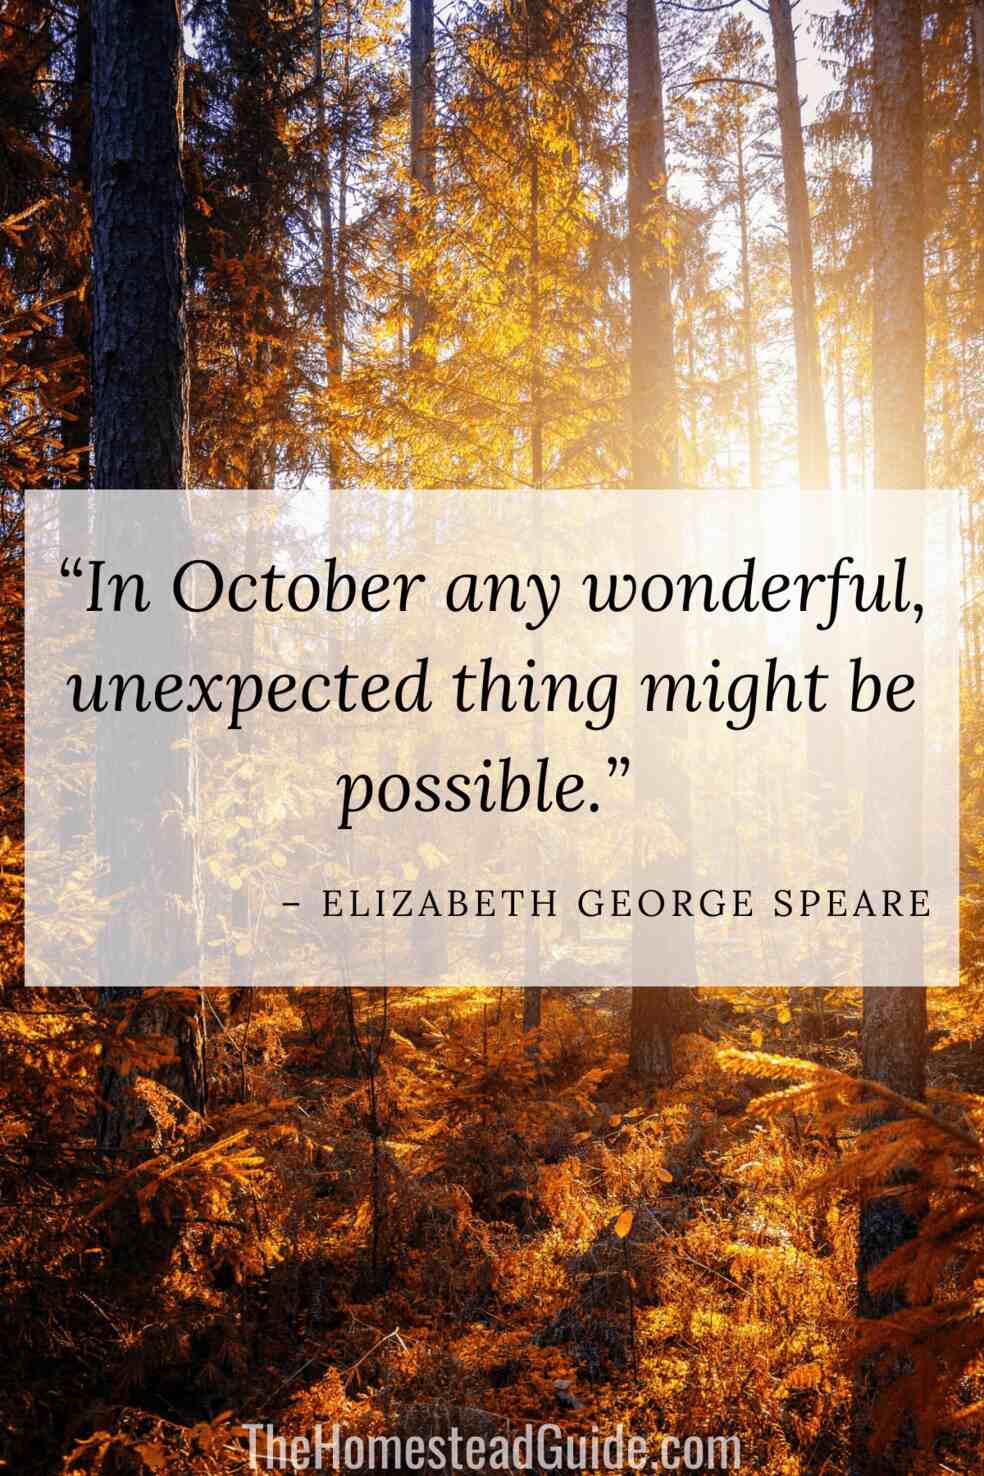 In October any wonderful, unexpected thing might be possible.